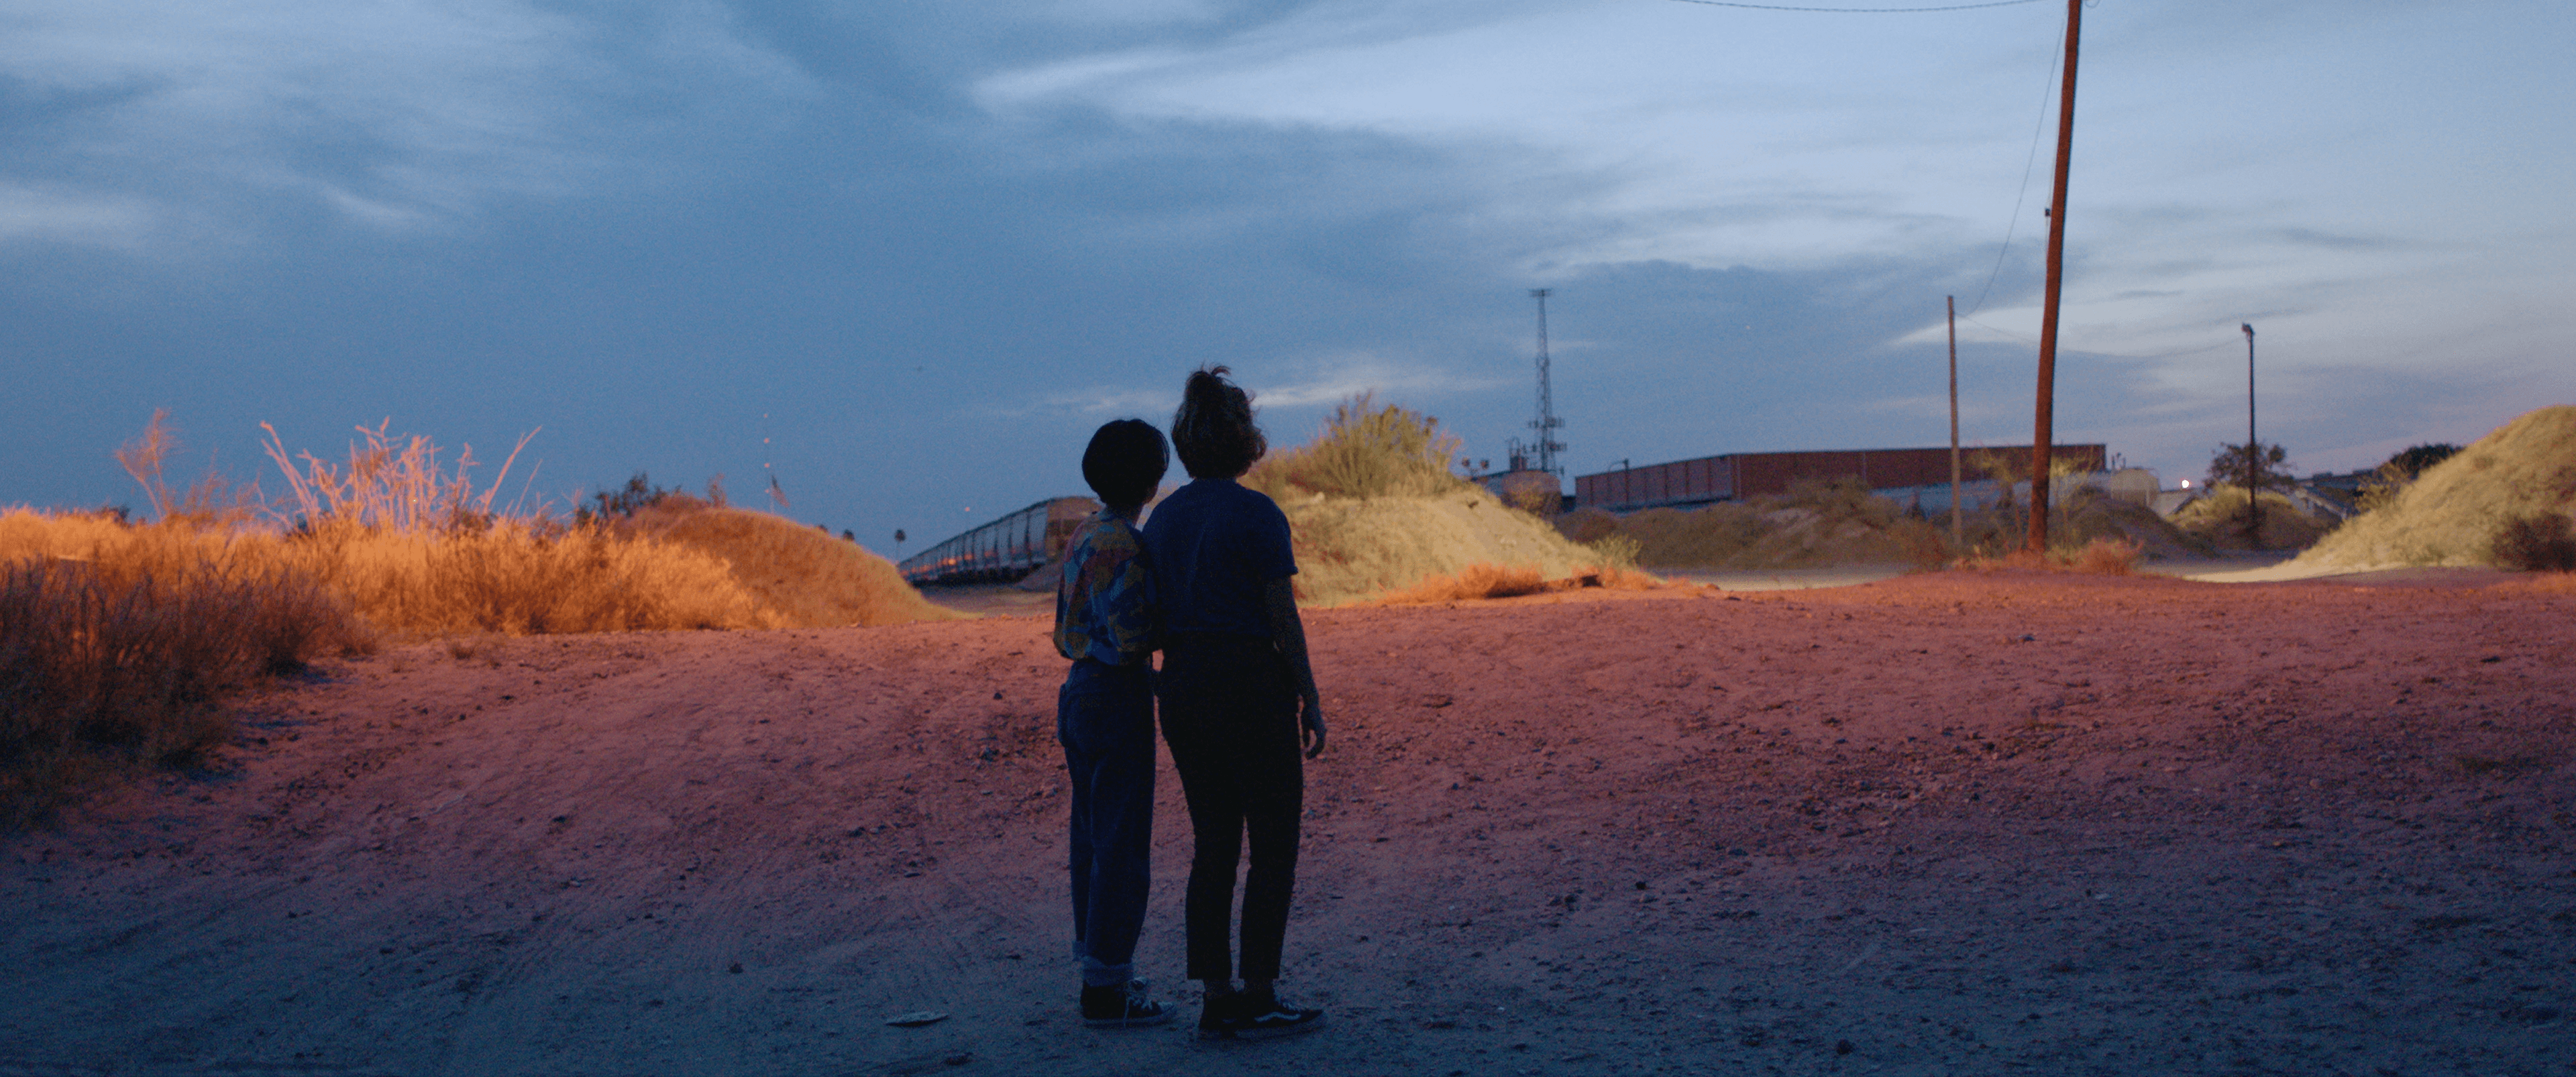 Silvia and Beba's silhouettes are pictured in front of a train at sundown.